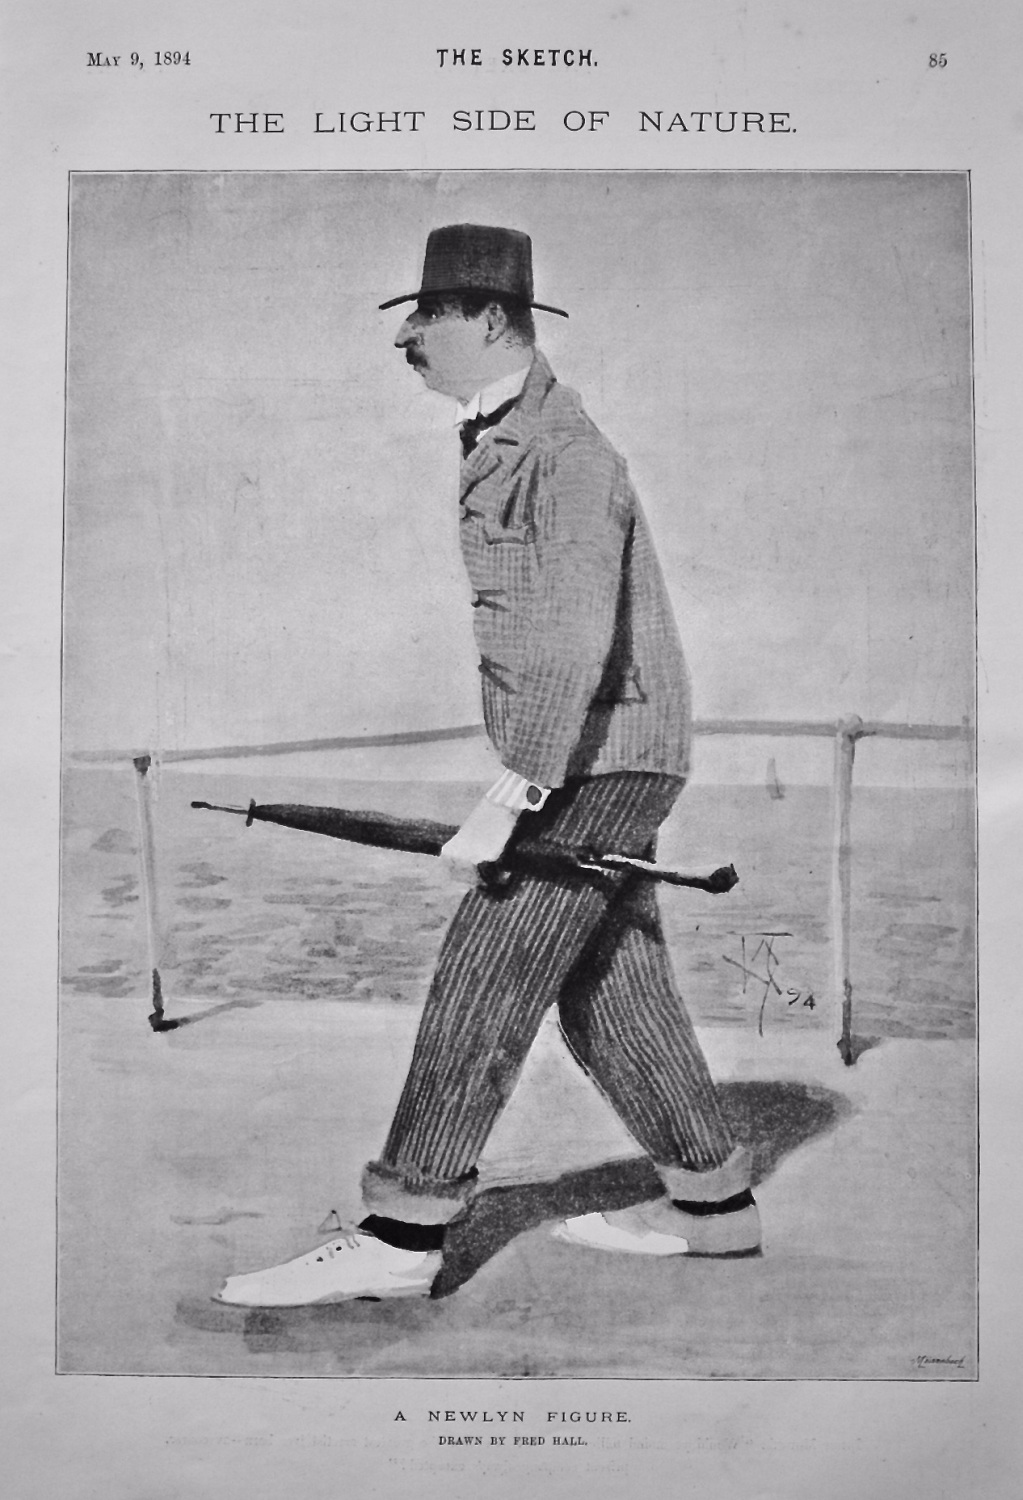 The Light Side of Nature : A Newlyn Figure. 1894.